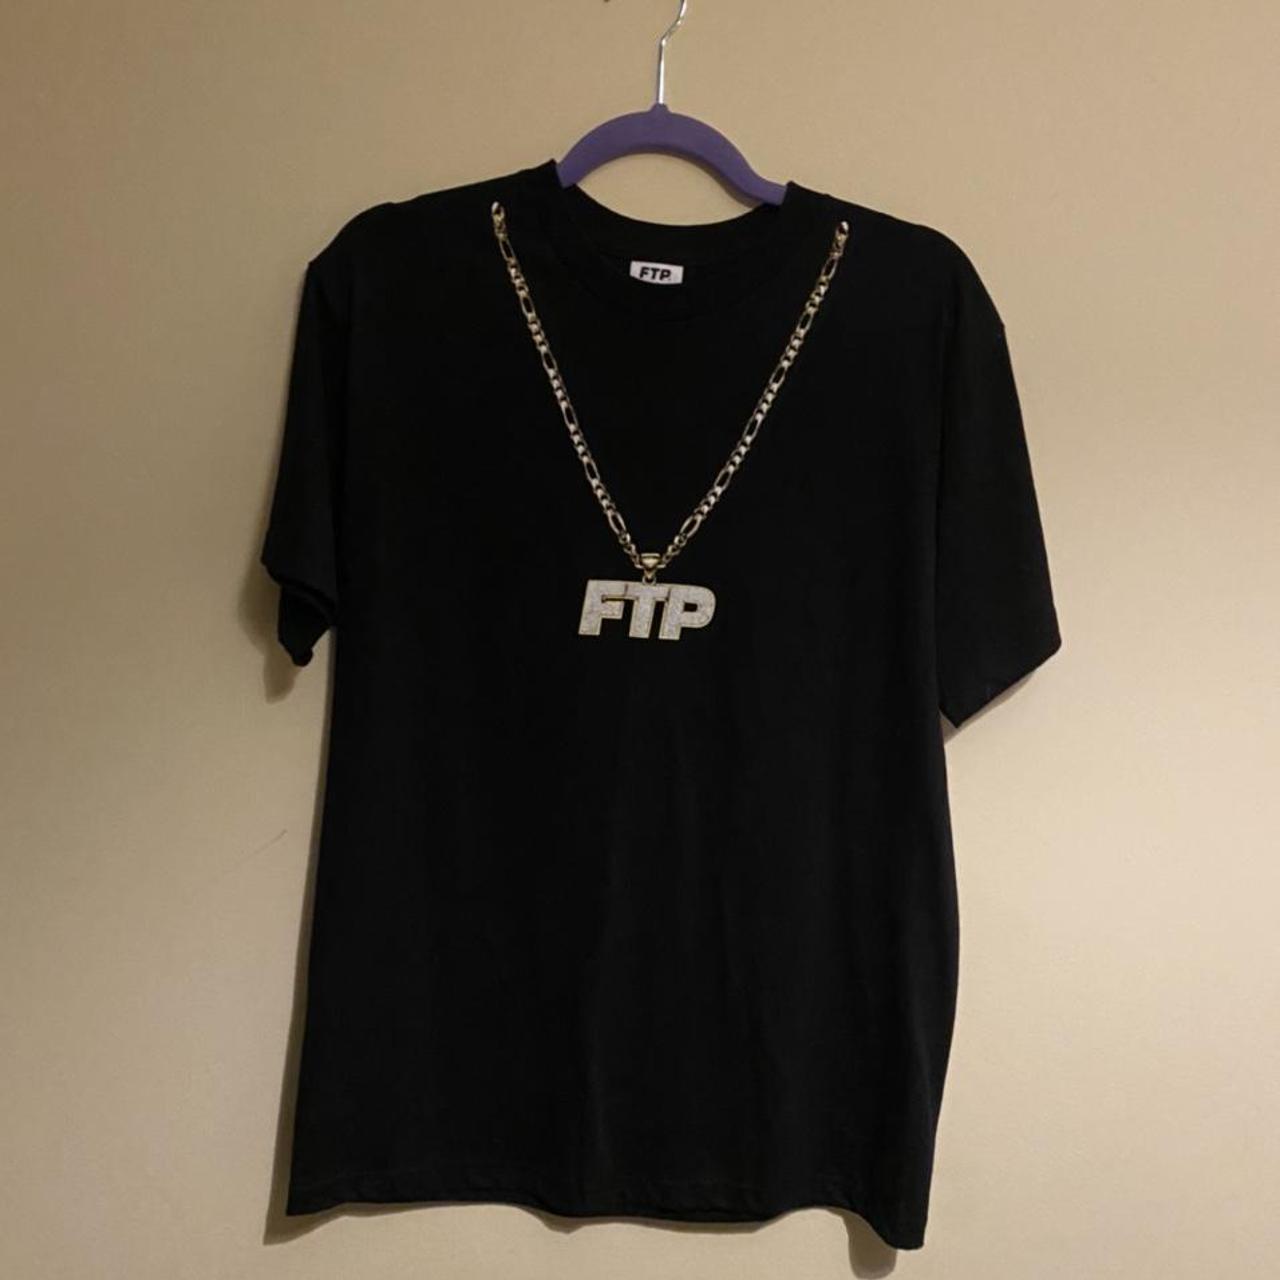 Product Image 1 - FTP Chain Tee - White